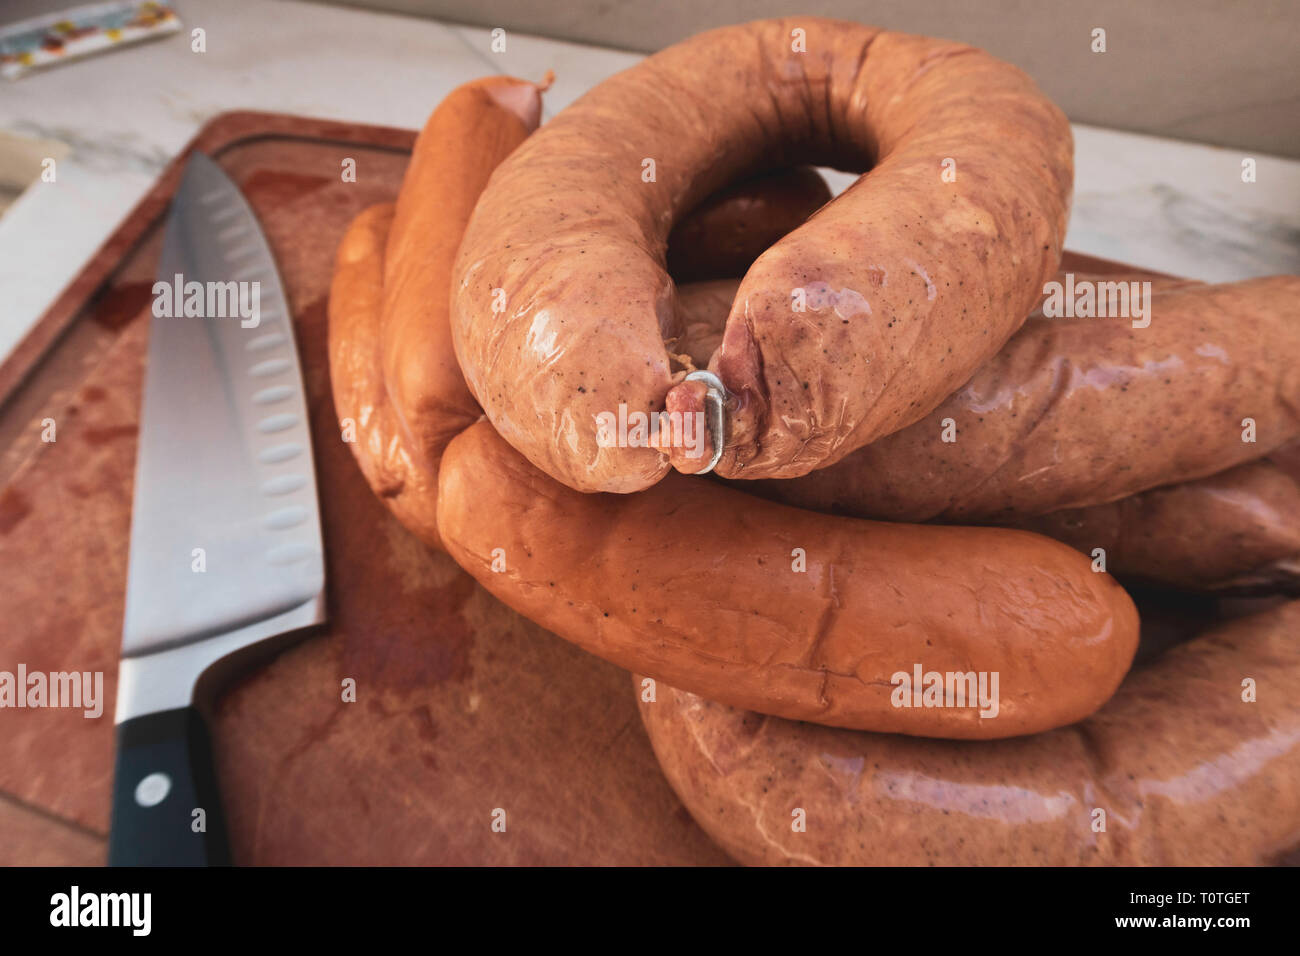 Close-up on Wurst on a Cutting Board in a Residential Kitchen, USA Stock Photo